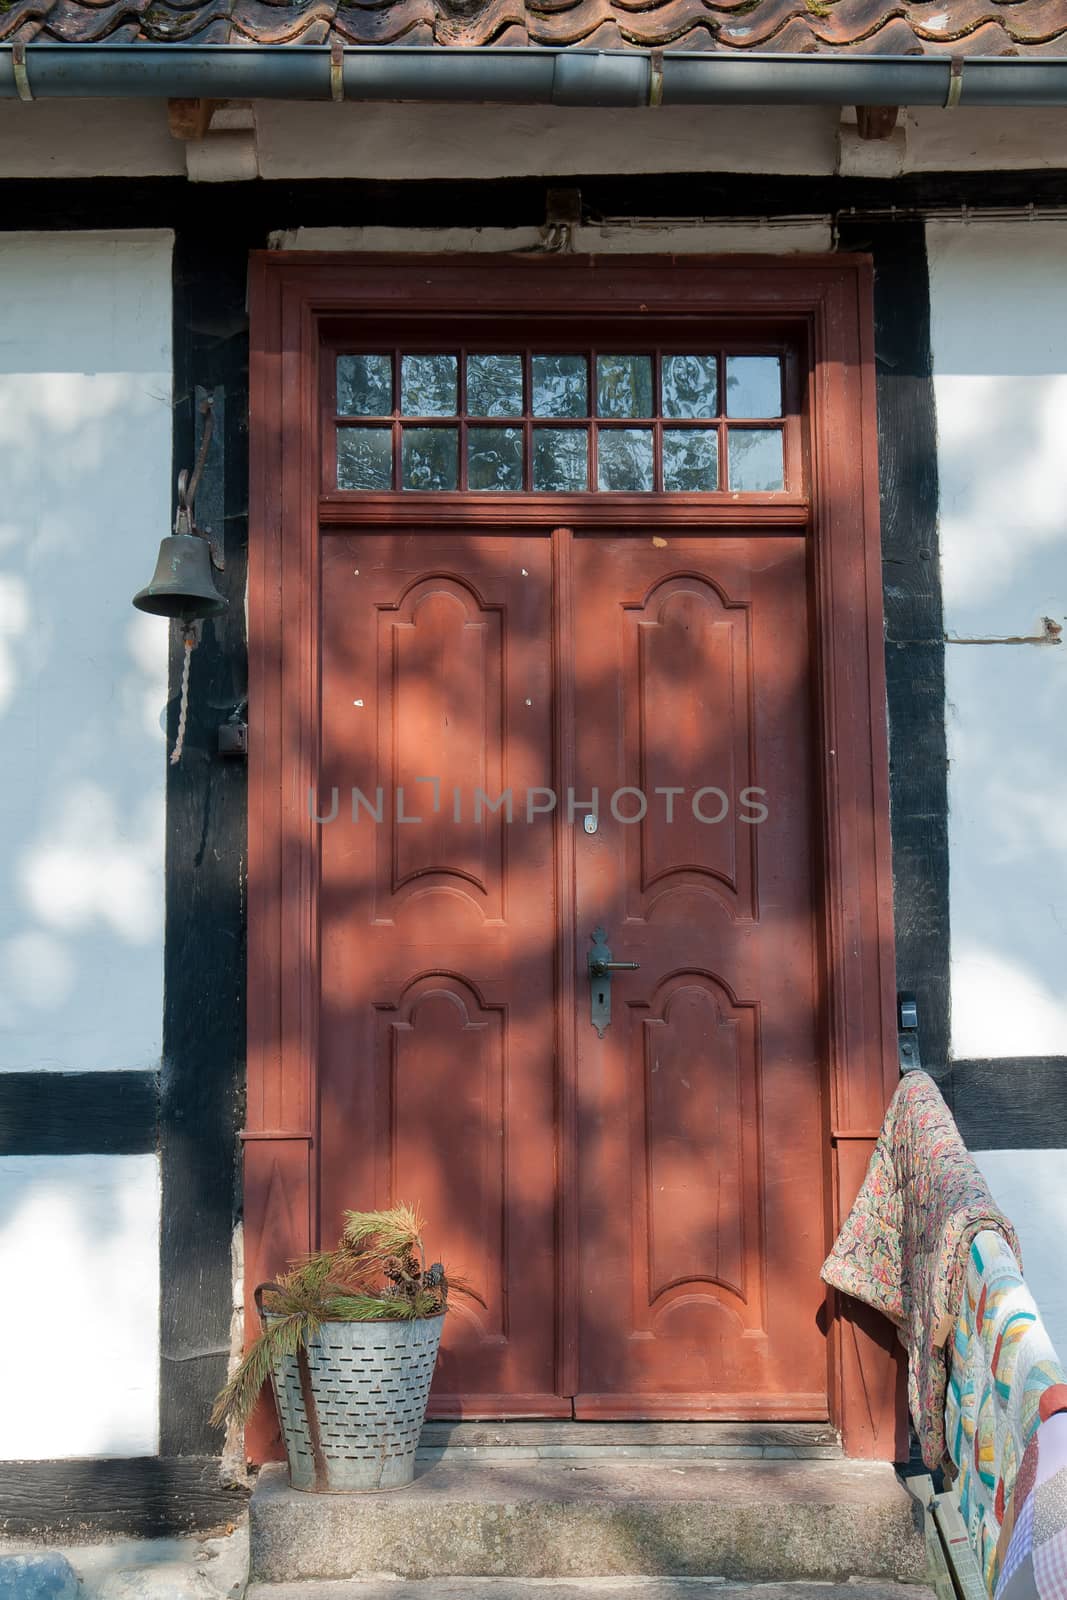 Decorative vintage classical design wooden door in a country home